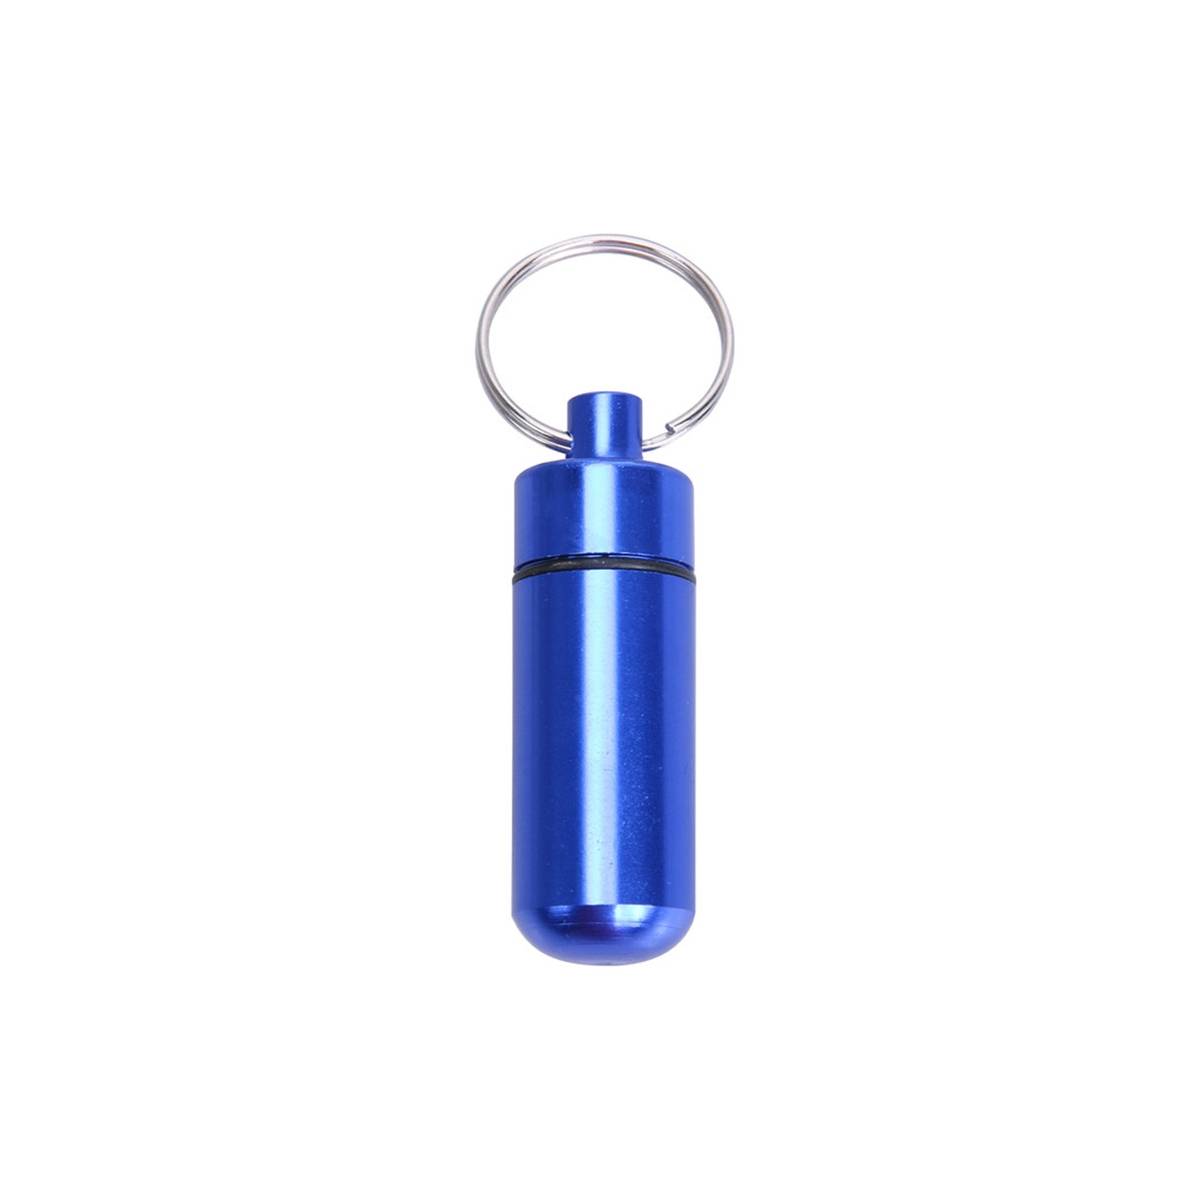 https://cablesformac.com/47984-thickbox_default/waterproof-container-for-pills-or-geocaching-bison-blue.jpg